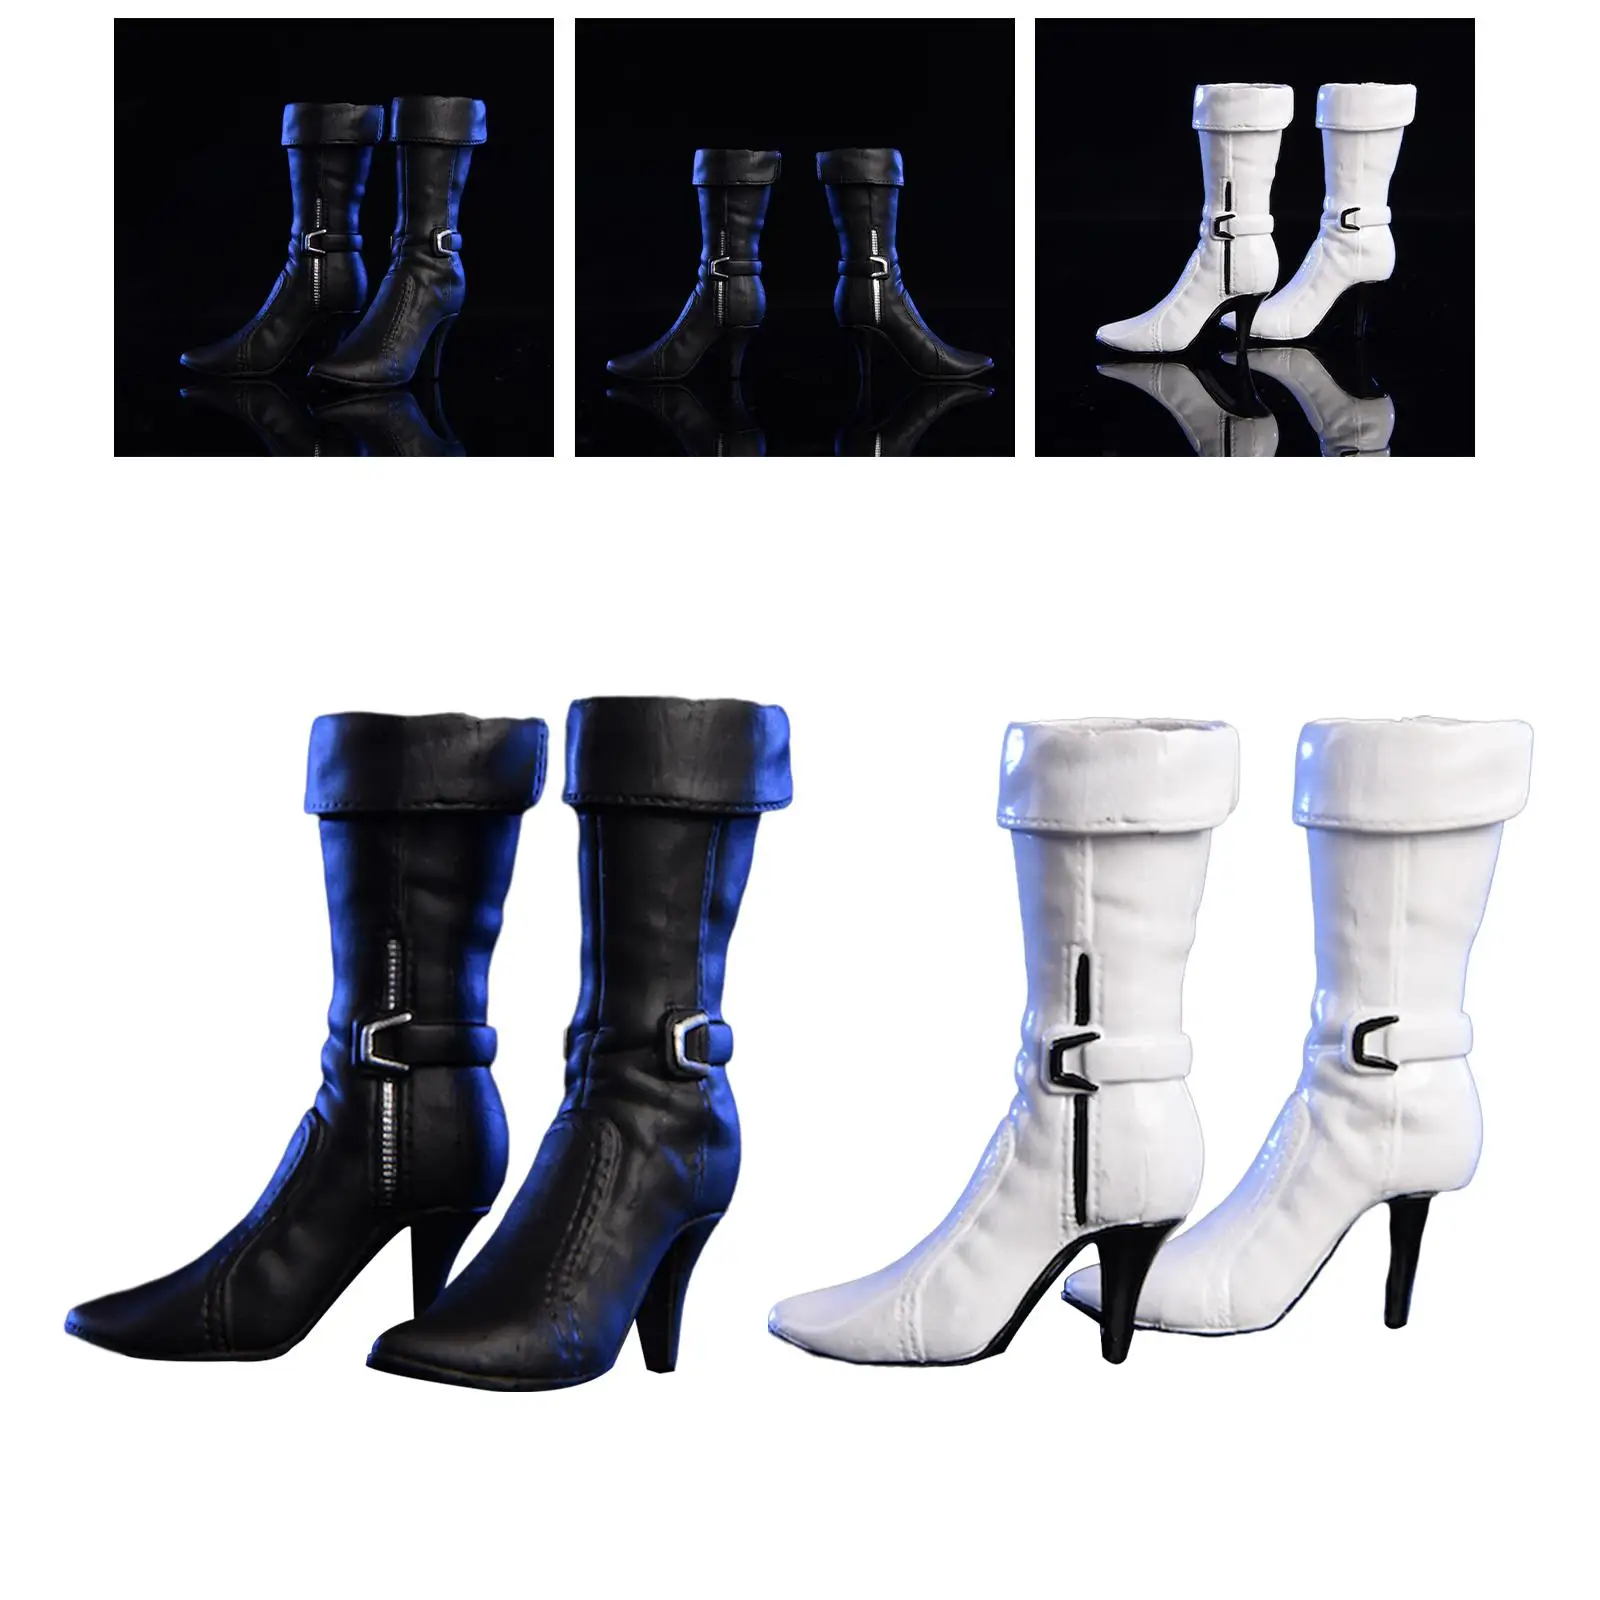 1/6 Scale Figure Shoes PU Leather Outfits Girl Doll Shoes Fashion Boots High Heeled Shoes for 12 inch Action Figure Accessories